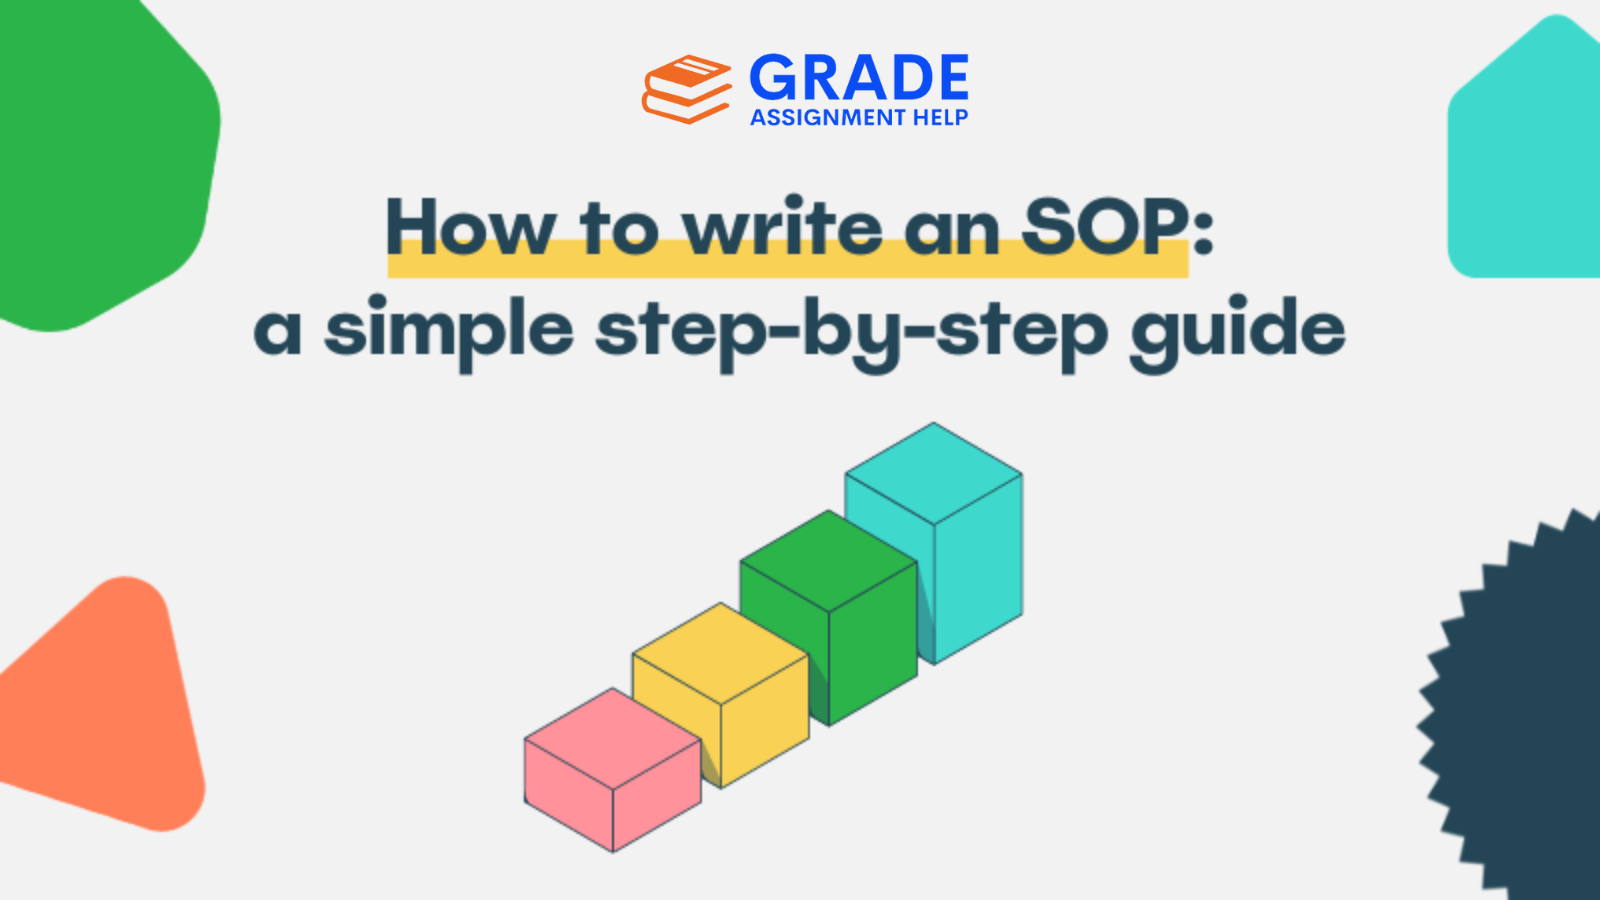 How to write a SOP